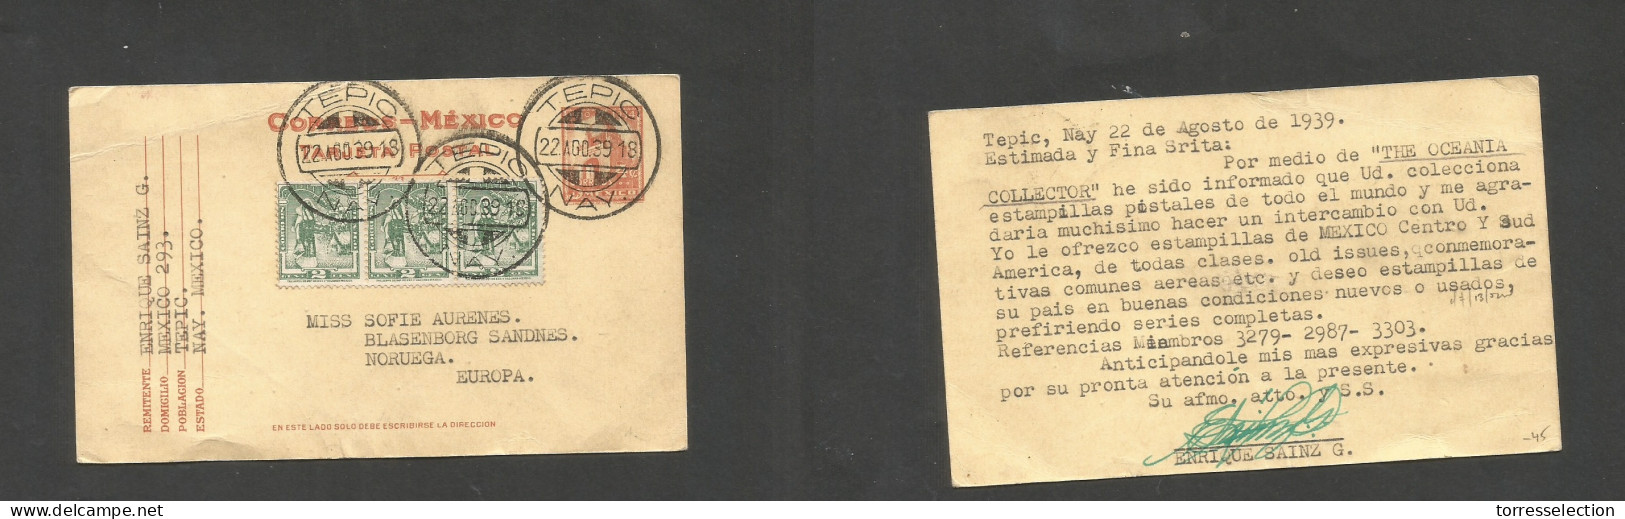 MEXICO - Stationery. 1939 (22 Aug) Tepic, Nay - Norway, Blasenborg. 4c Red Stat Card + 3 Adtls, At 10c Rate, Tied Cds. X - Mexiko